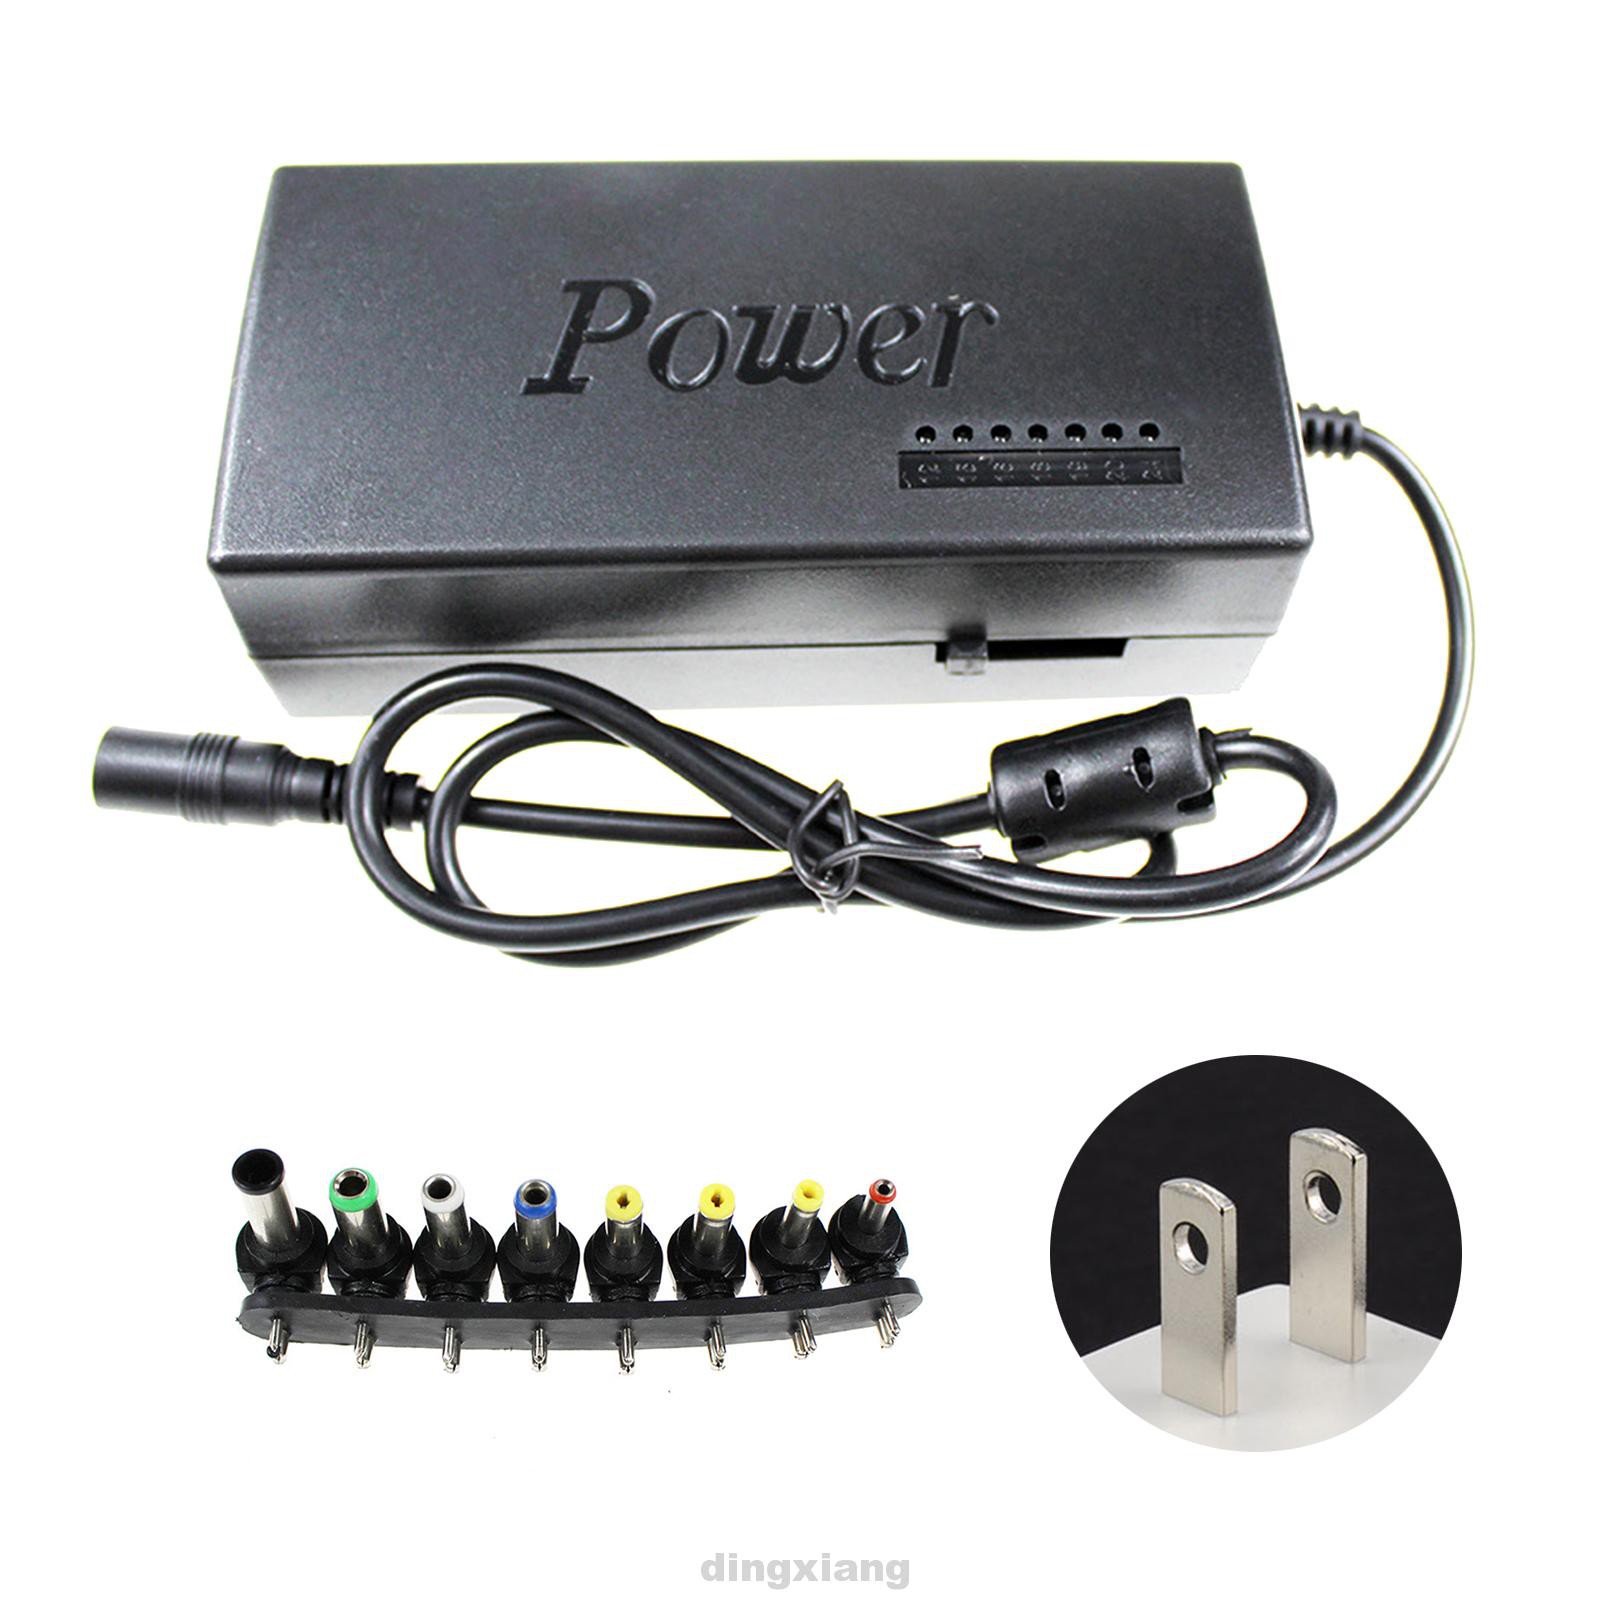 Power Supply Compact Portable Stable Home Office Easy Operate 8 Detachable Plugs Laptop Adapter | BigBuy360 - bigbuy360.vn